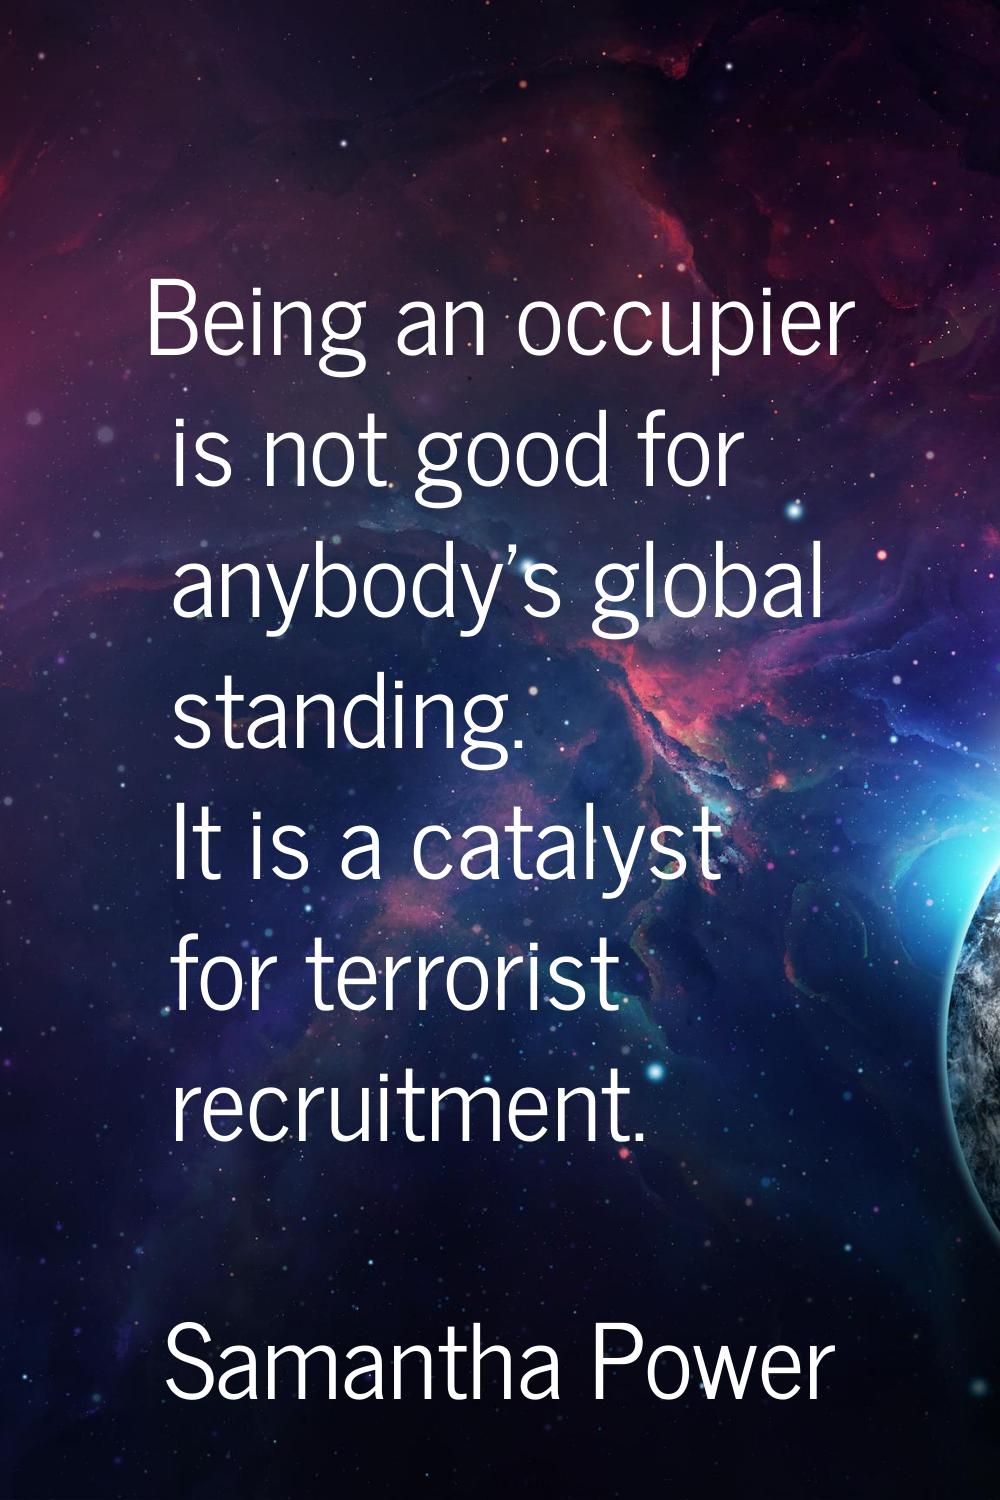 Being an occupier is not good for anybody's global standing. It is a catalyst for terrorist recruit